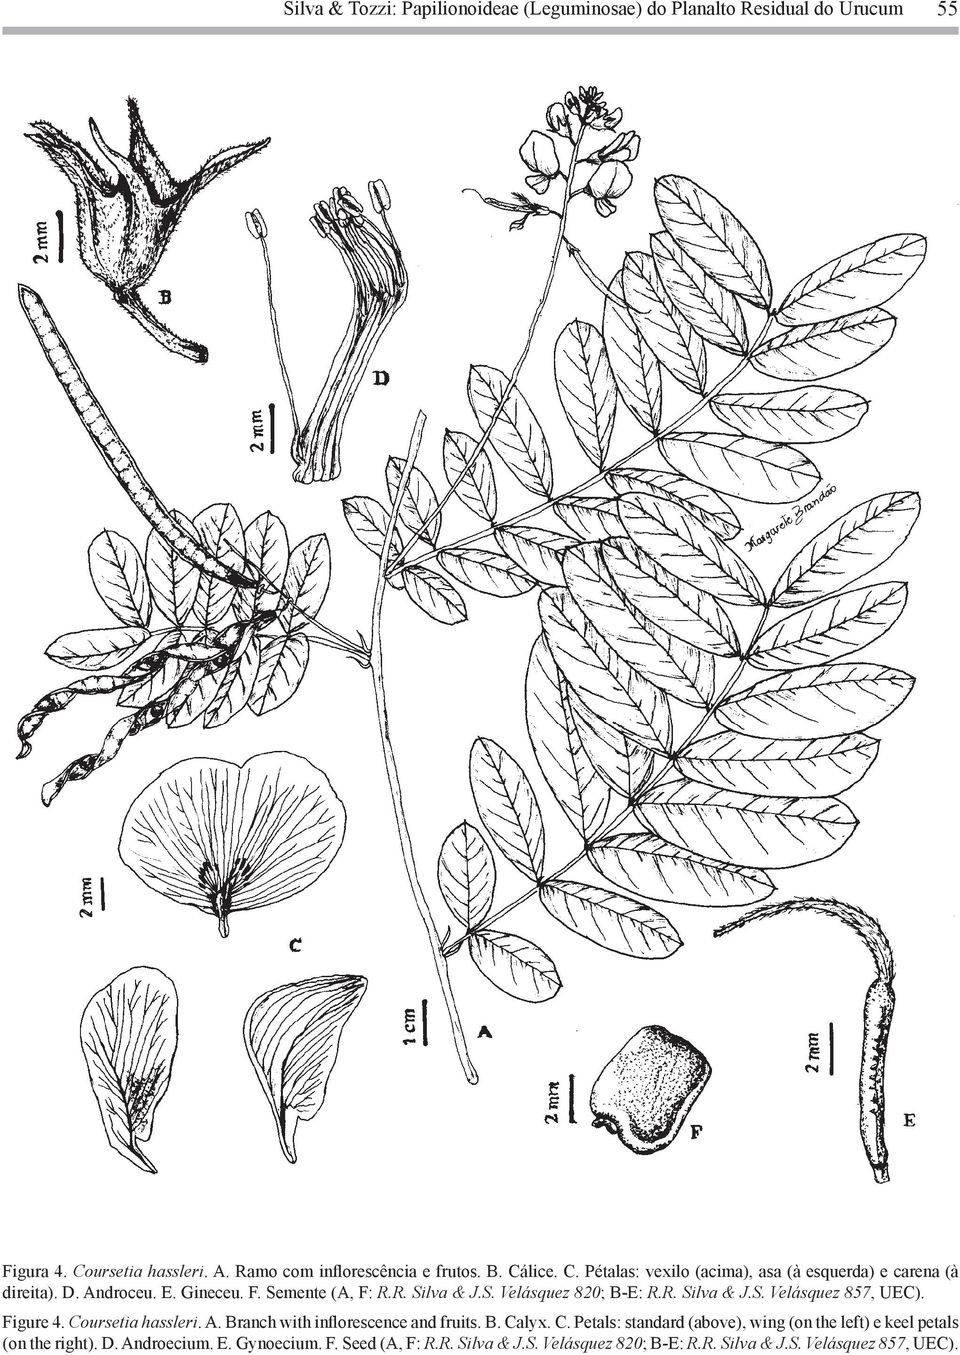 Figure 4. Coursetia hassleri. A. Branch with inflorescence and fruits. B. Calyx. C. Petals: standard (above), wing (on the left) e keel petals (on the right).